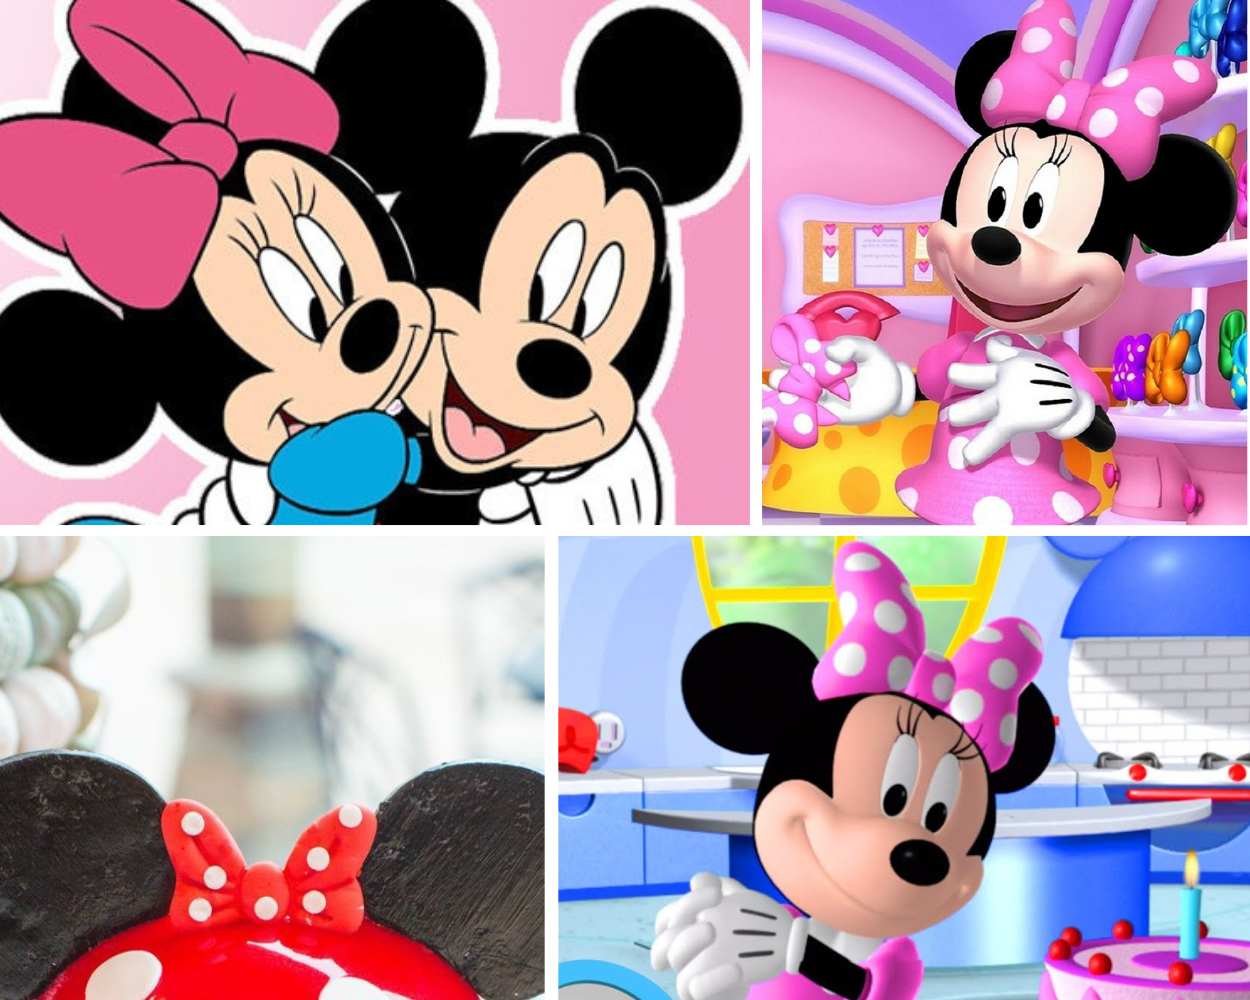 Minnie Mouse - Cartoon Mouse With Big Ears